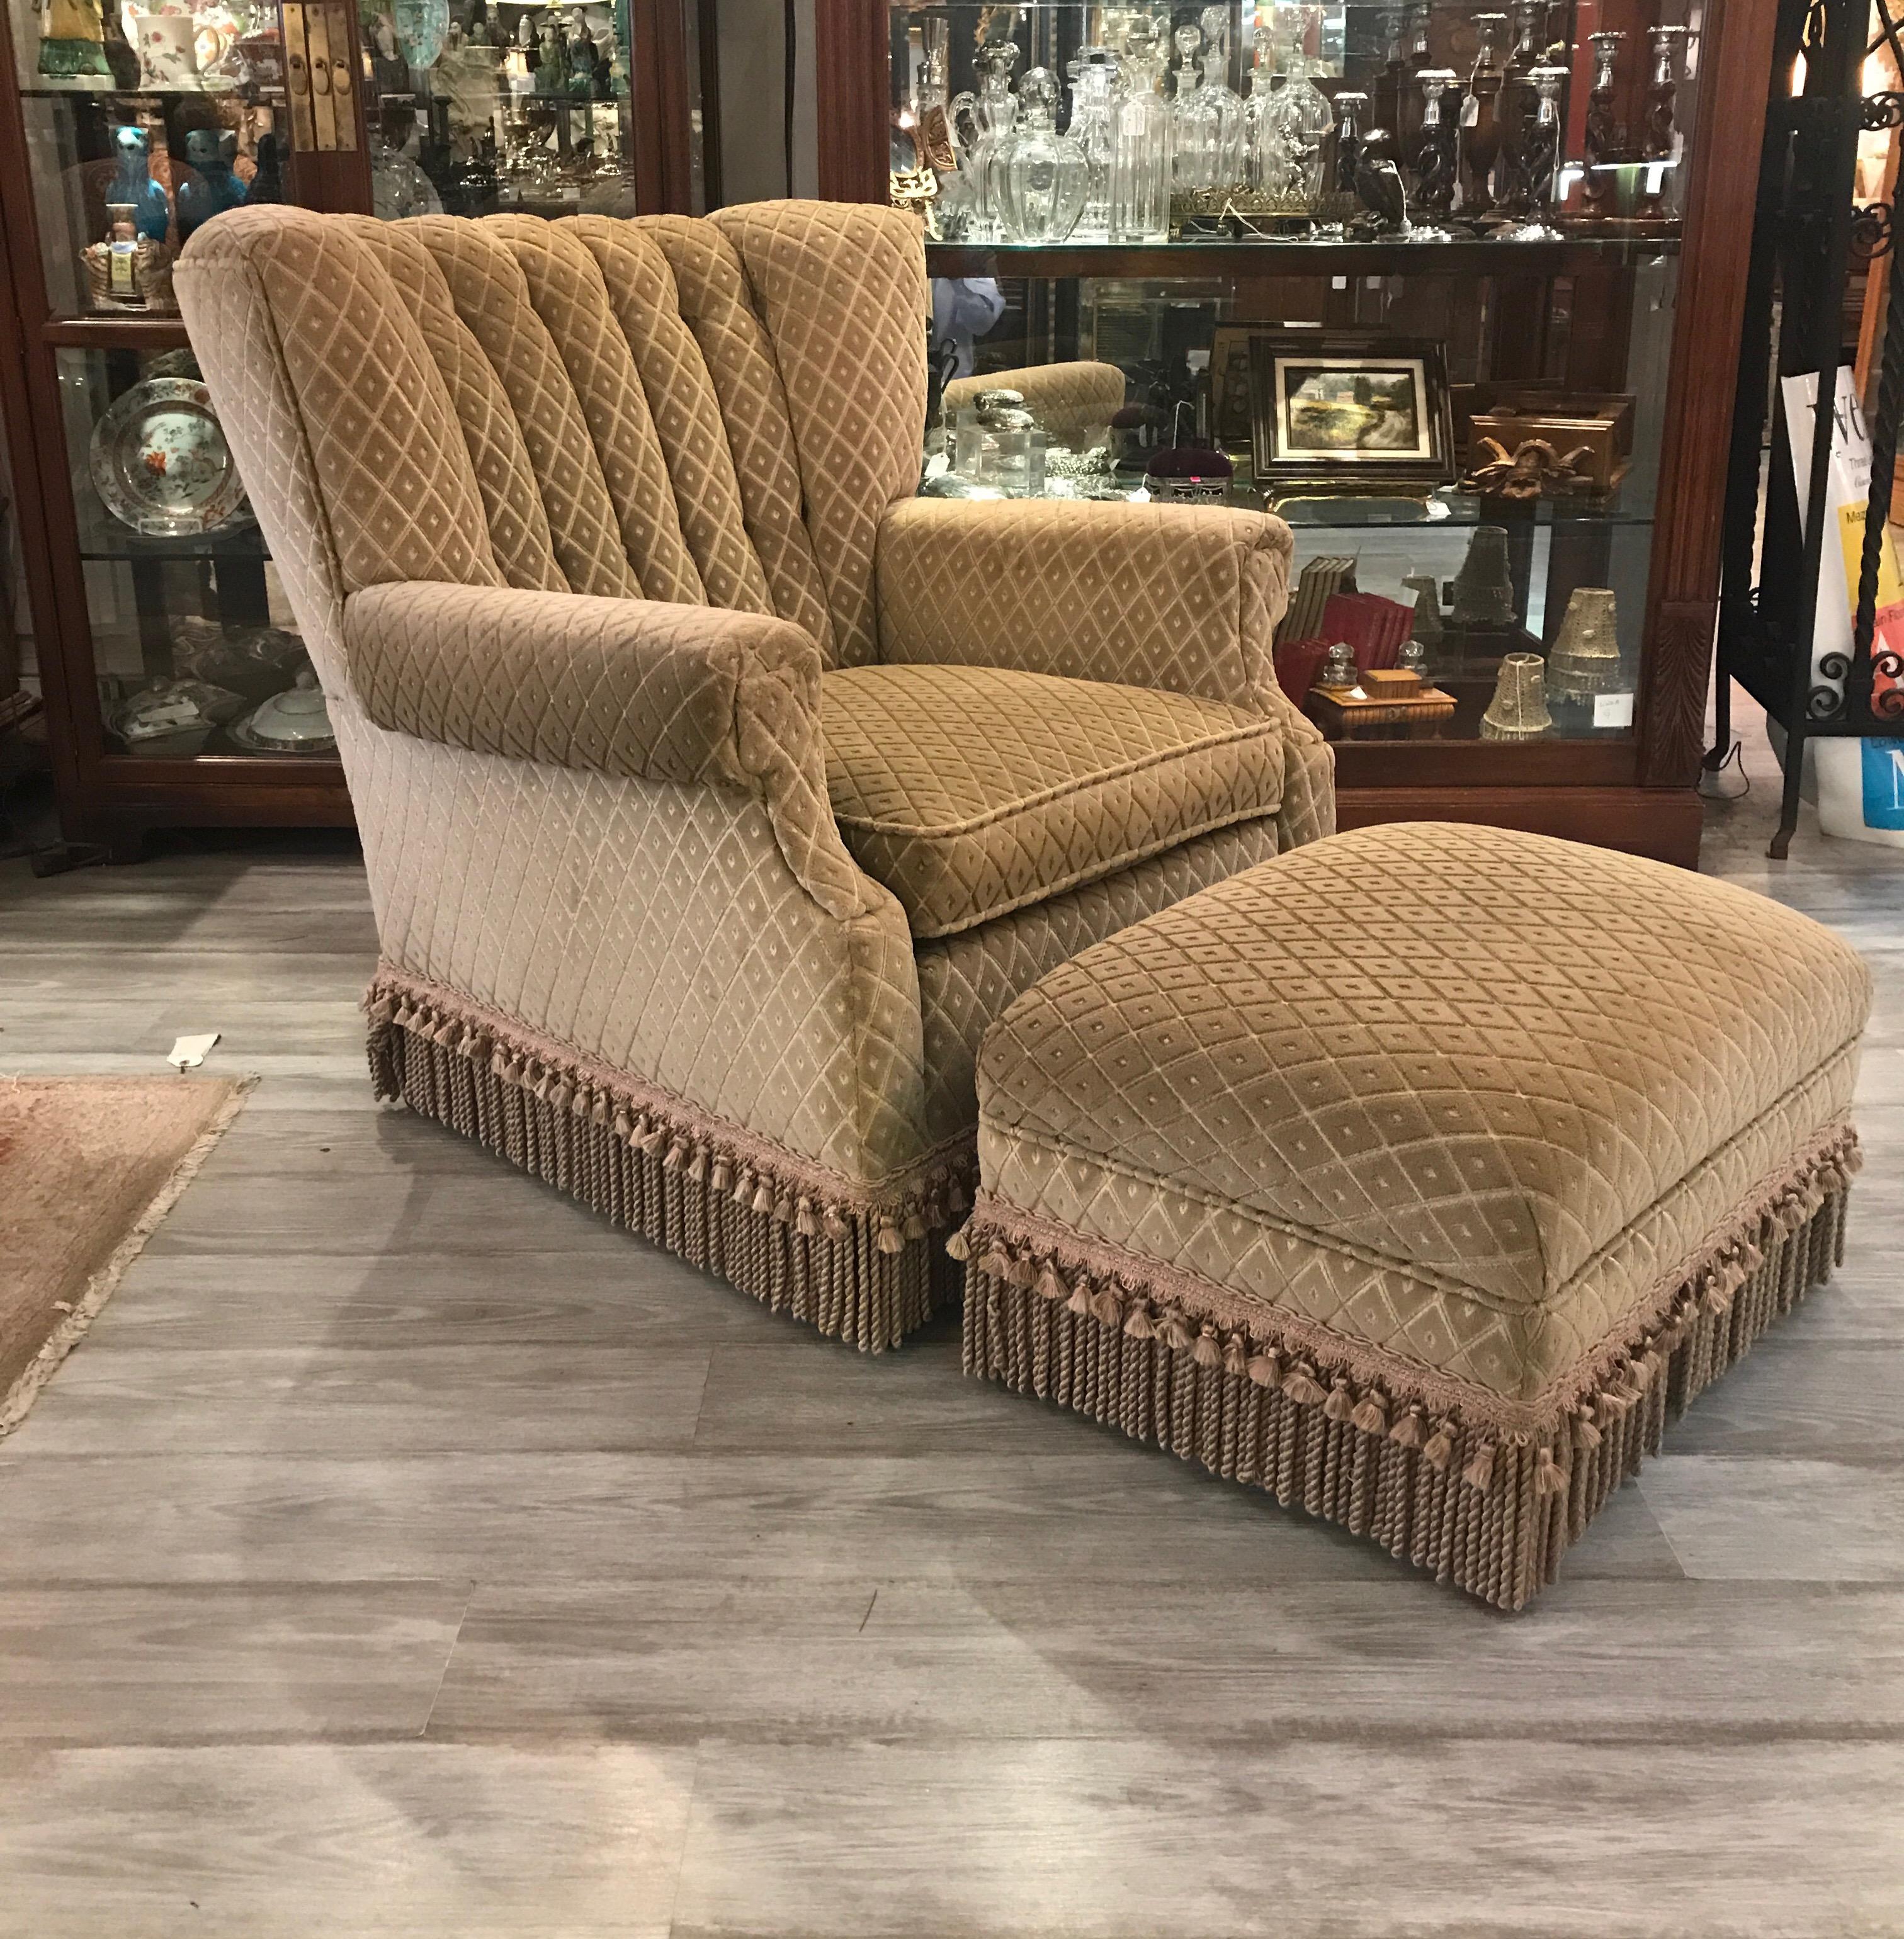 Stylish upholstered chair and ottoman in cut velvet with bouillon fringe. The chair with an 8 way hand tied spring construction and kiln dried hardwood frame made by Swaim. This Art Deco 1940s style the channeled back with a gentle cure for comfort.